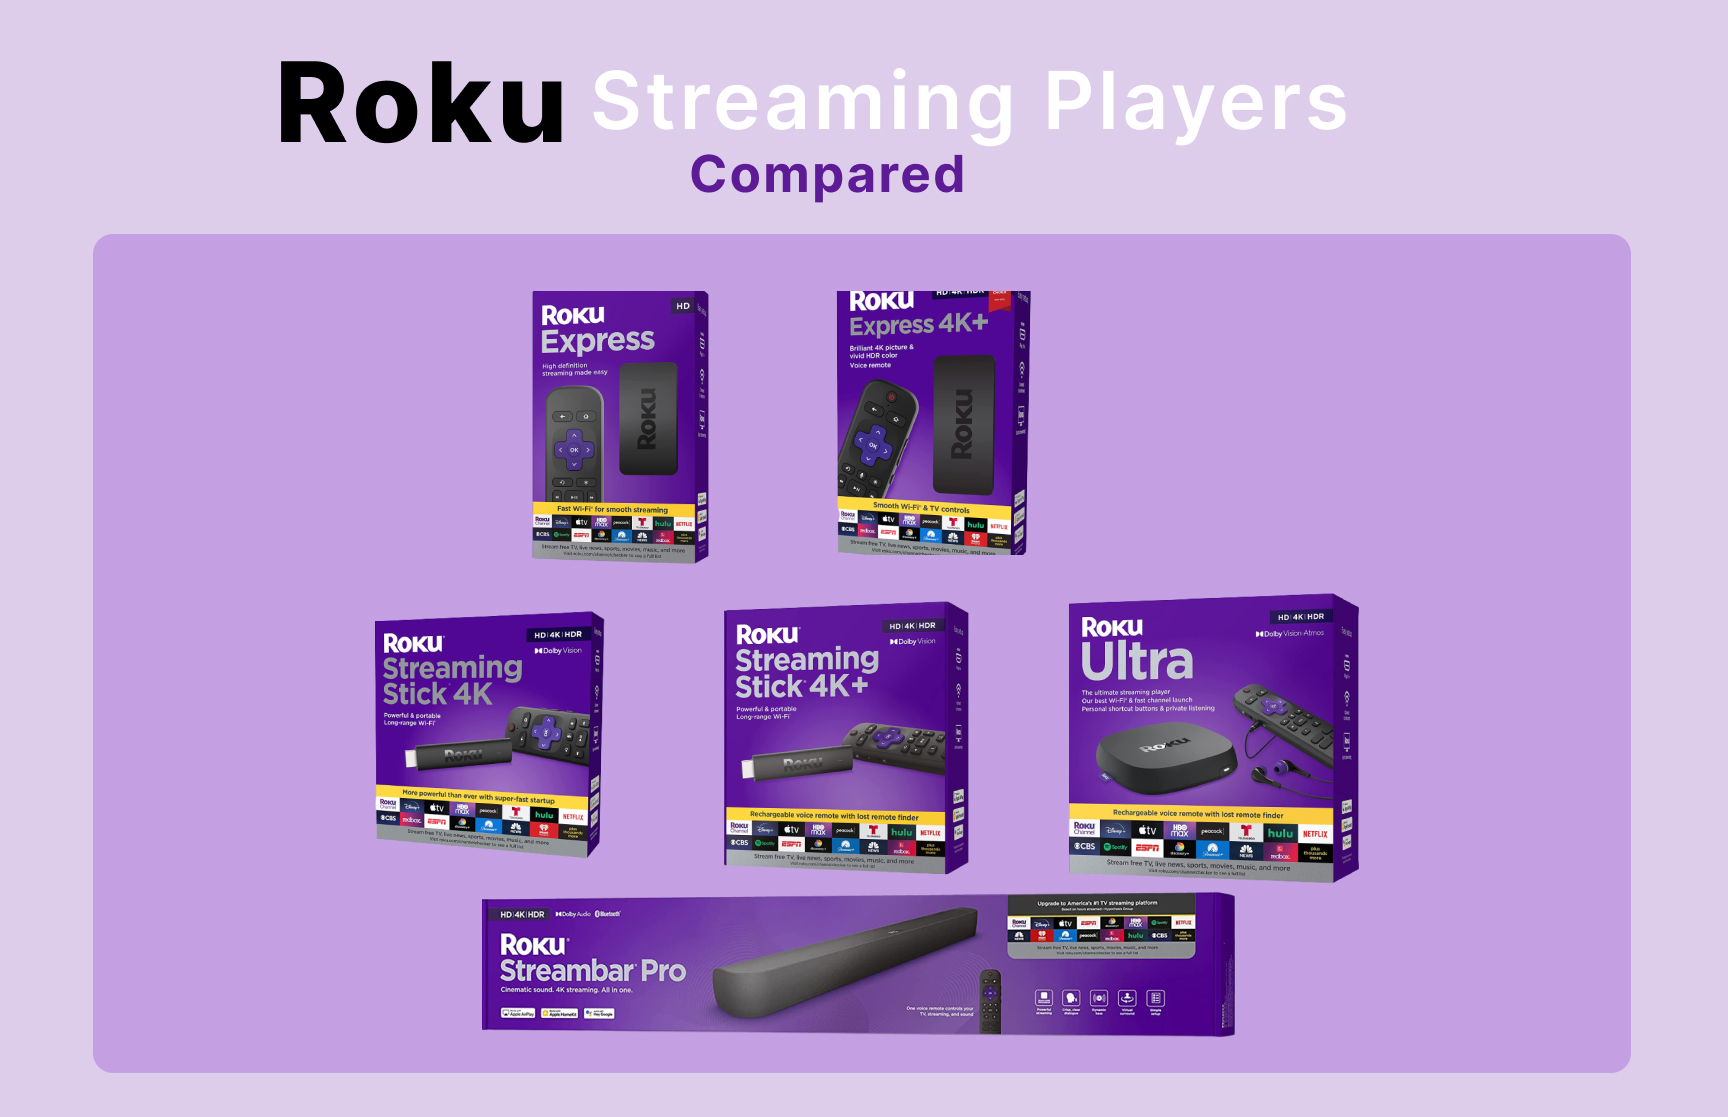 How to watch and stream Champion - 2018 on Roku